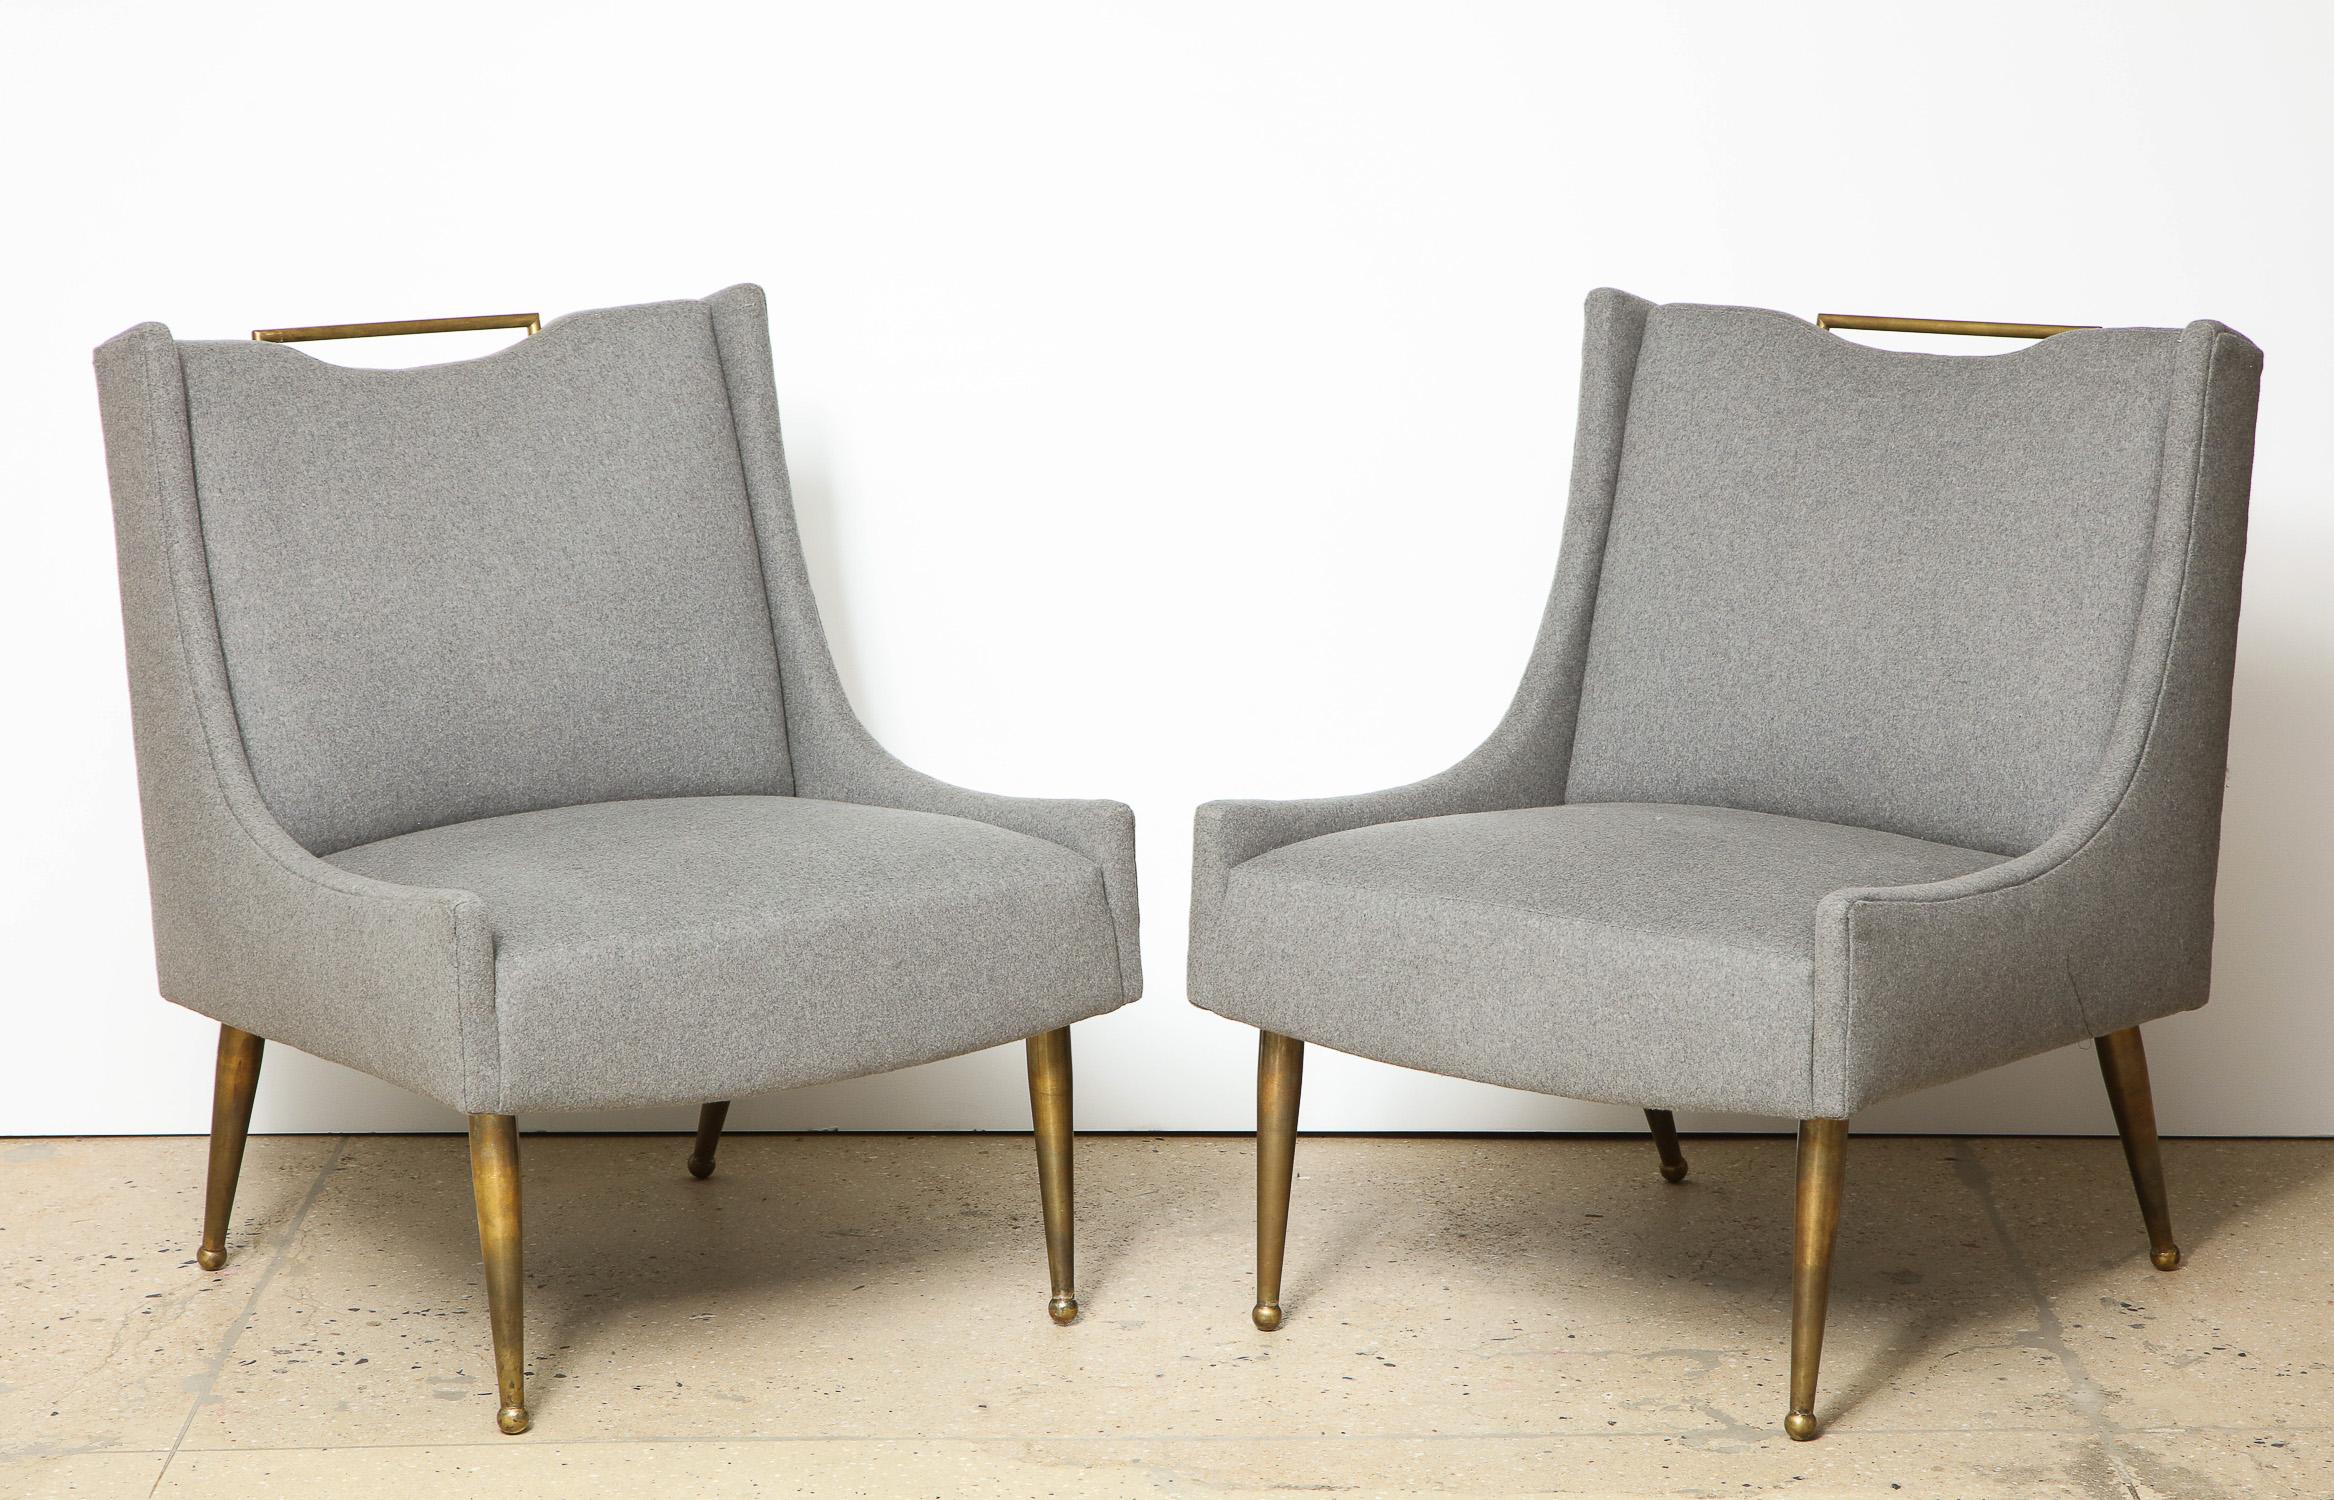 Upholstered slipper chairs on brass legs with a brass handle, wool upholstery, USA, 1950s.